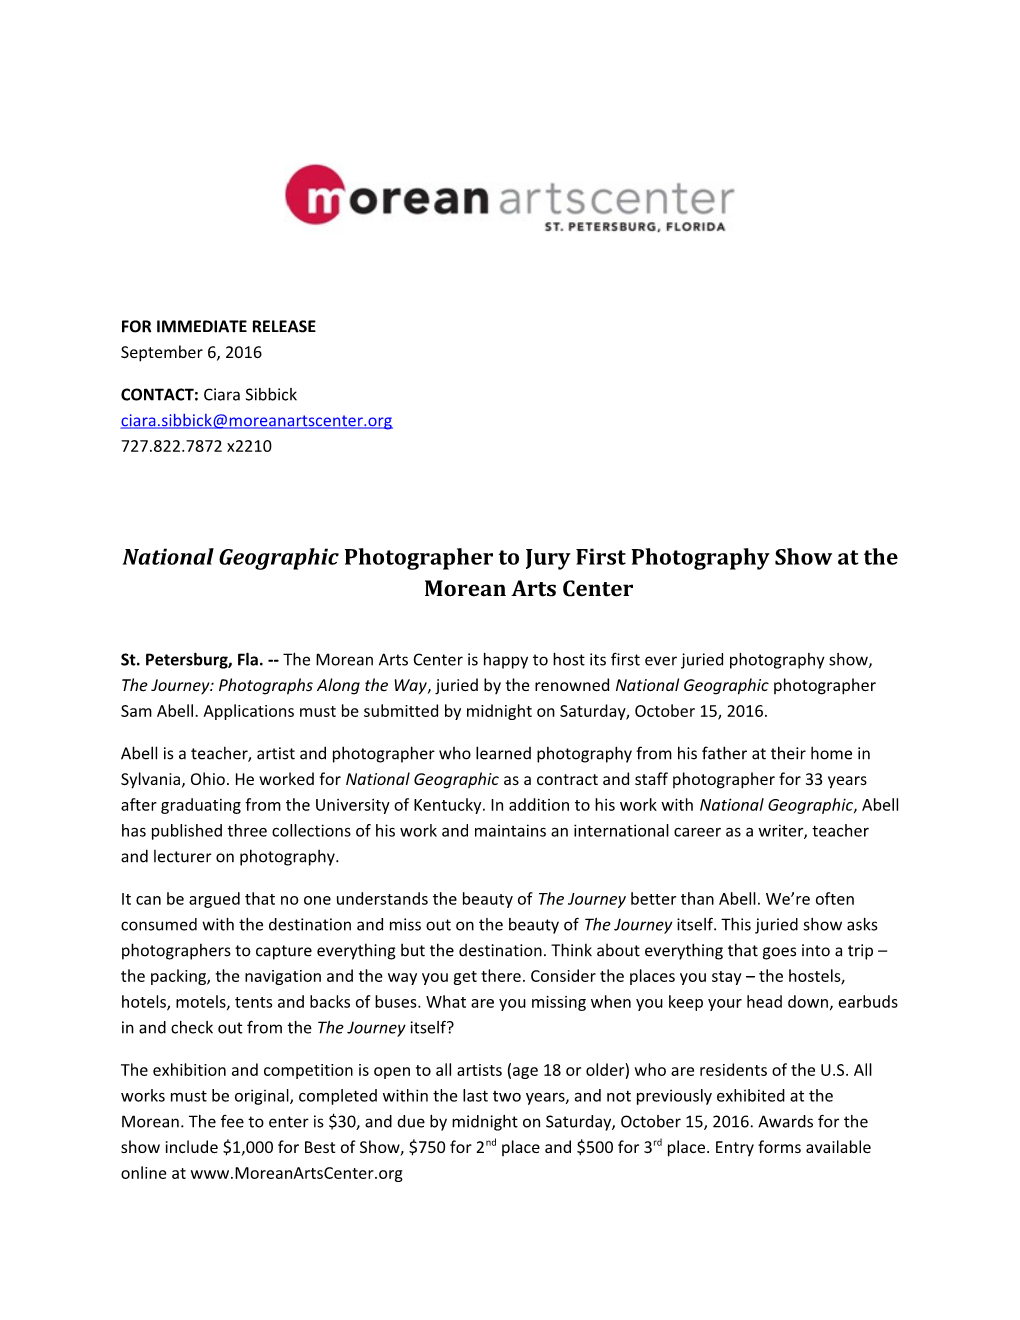 National Geographic Photographer to Jury First Photography Show at the Morean Arts Center